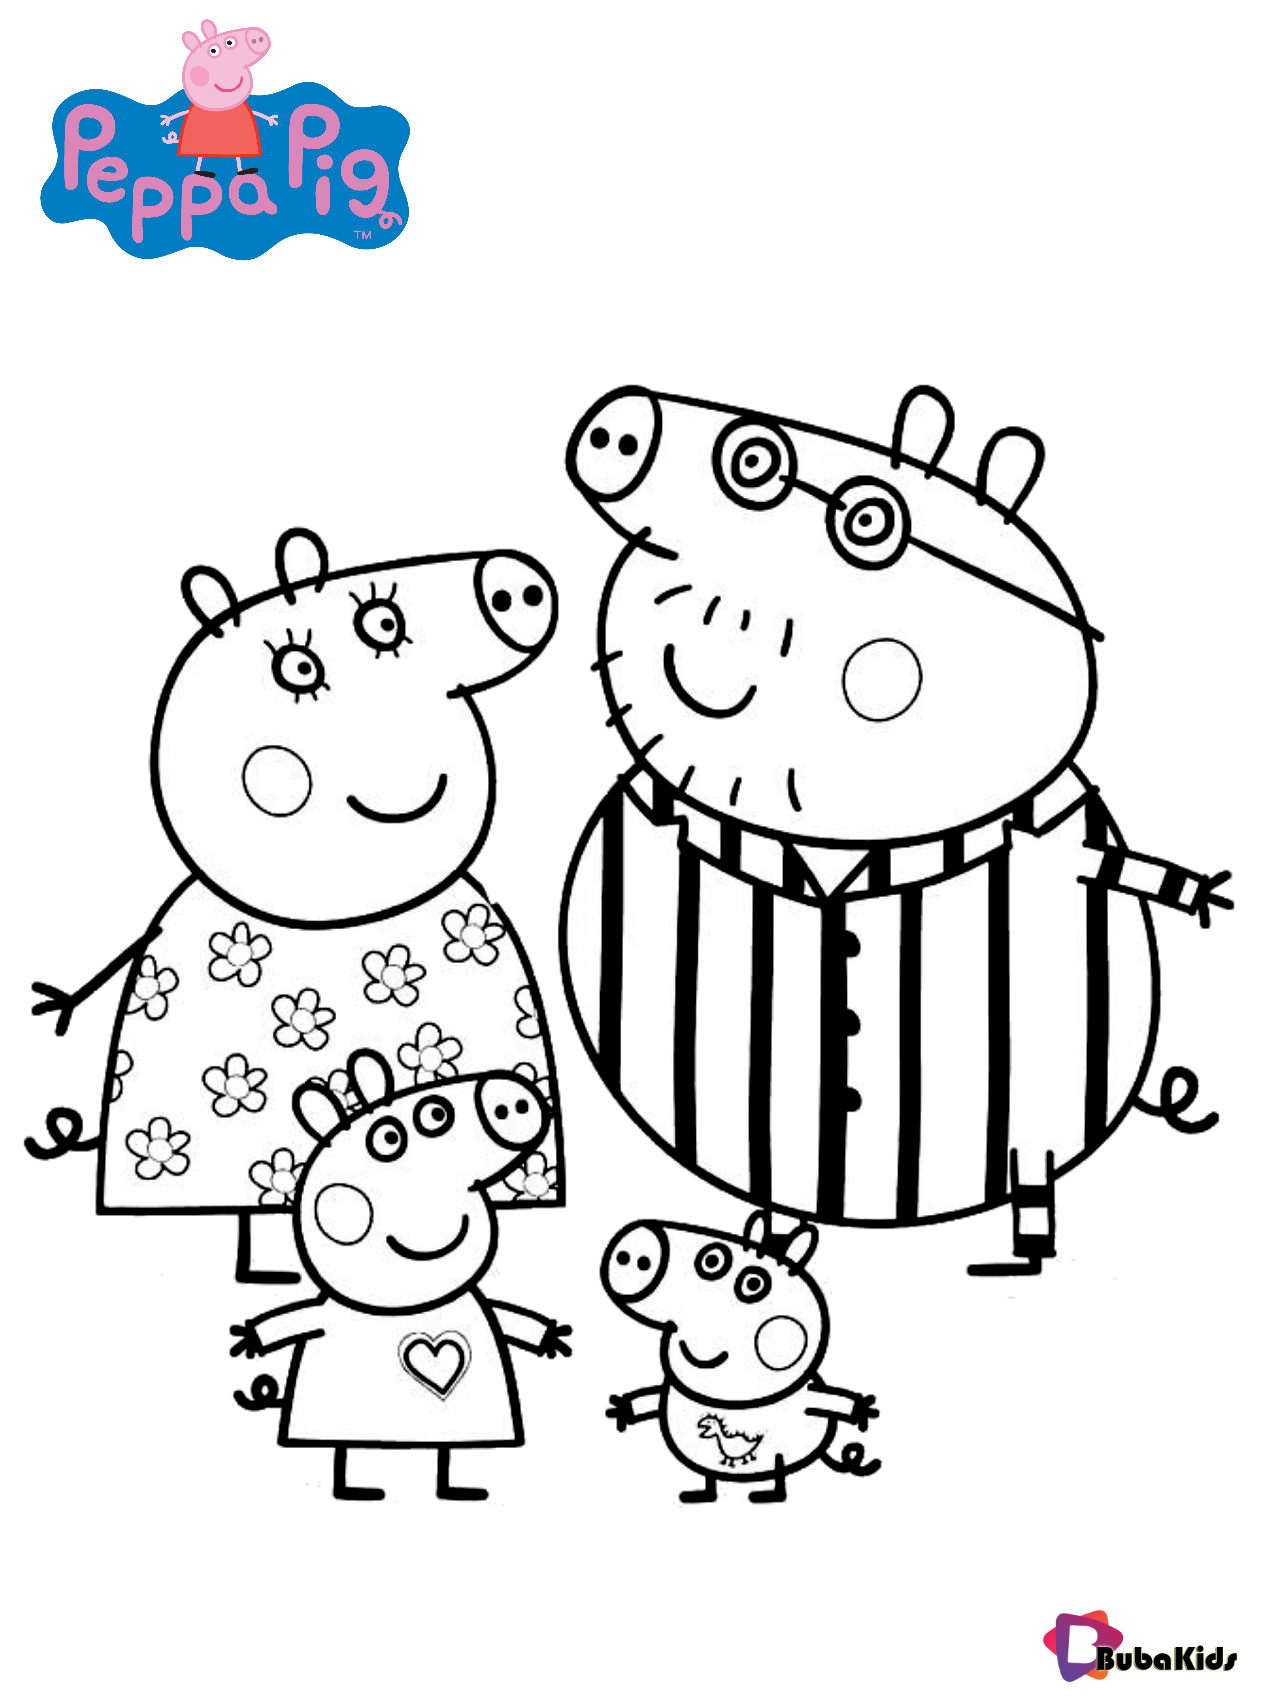 Peppa pig family coloring page Wallpaper